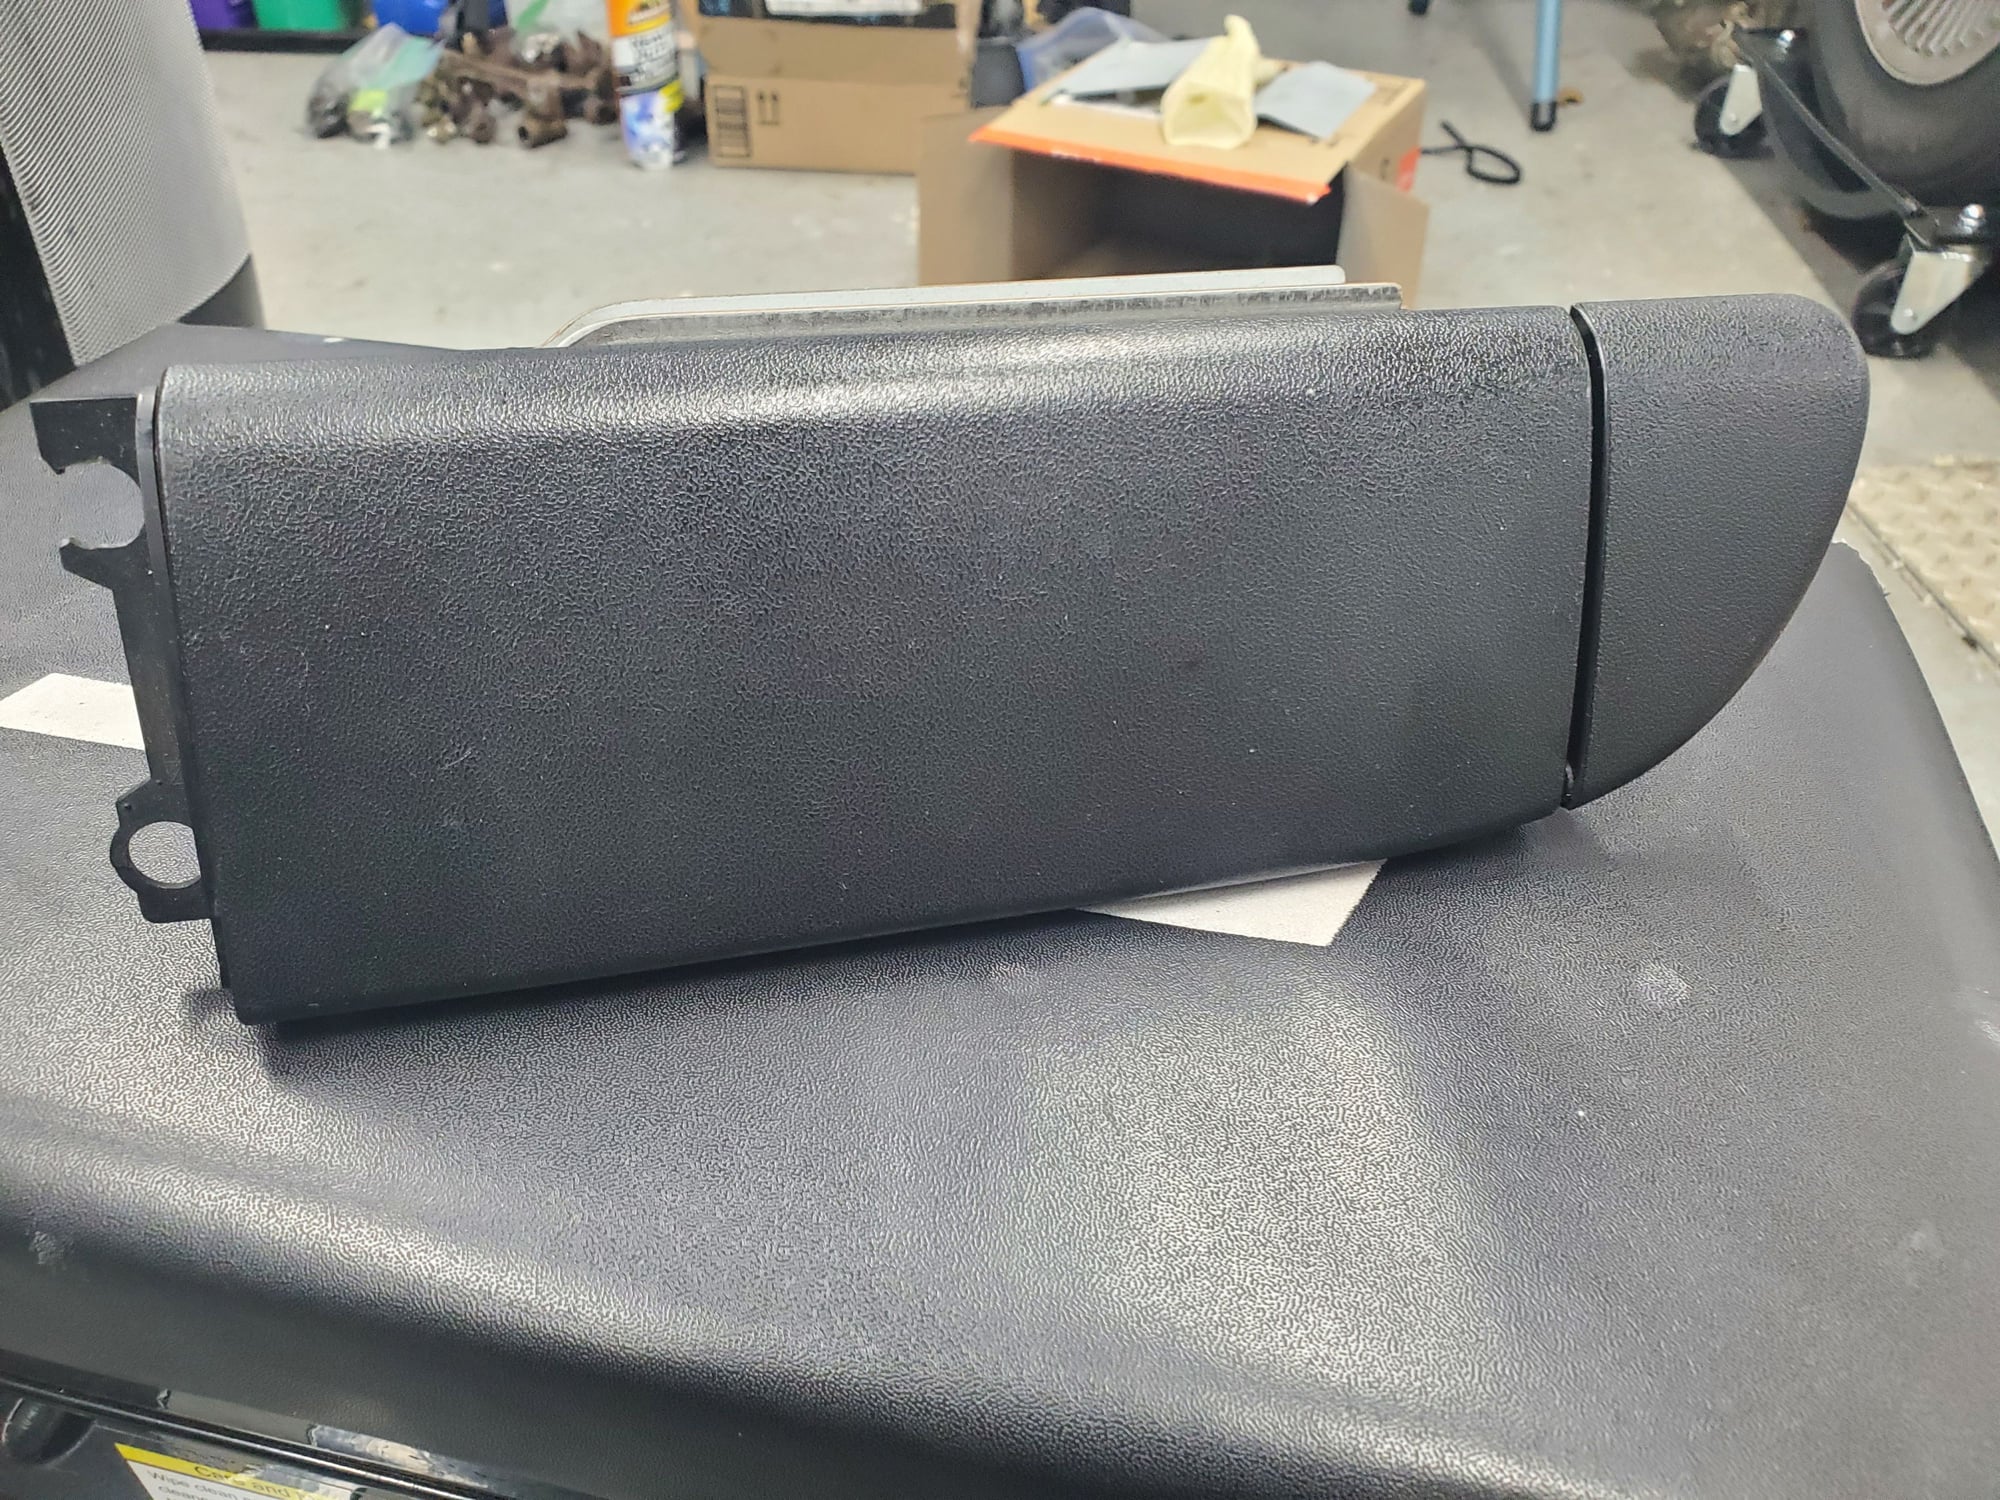 Interior/Upholstery - 94+ textured trim - Used - 1993 to 1995 Mazda RX-7 - Keene, NH 03431, United States